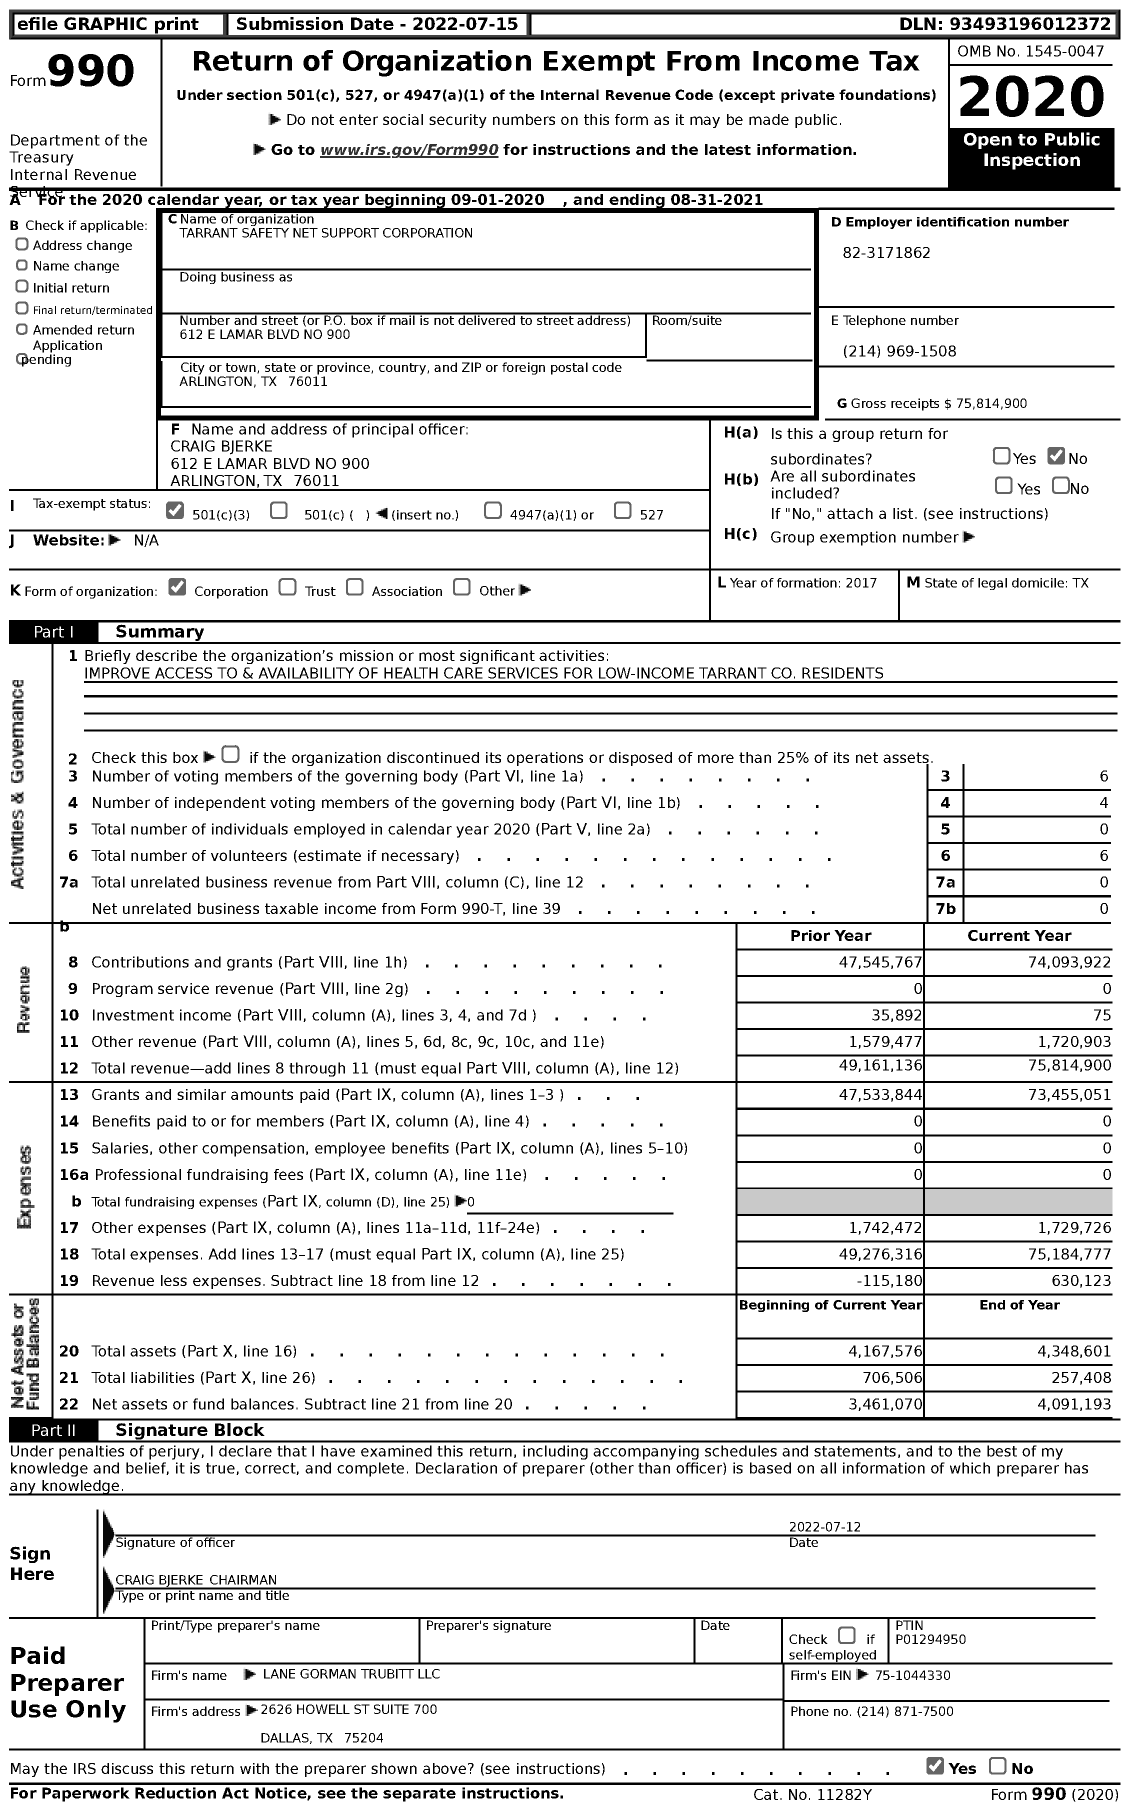 Image of first page of 2020 Form 990 for Tarrant Safety Net Support Corporation